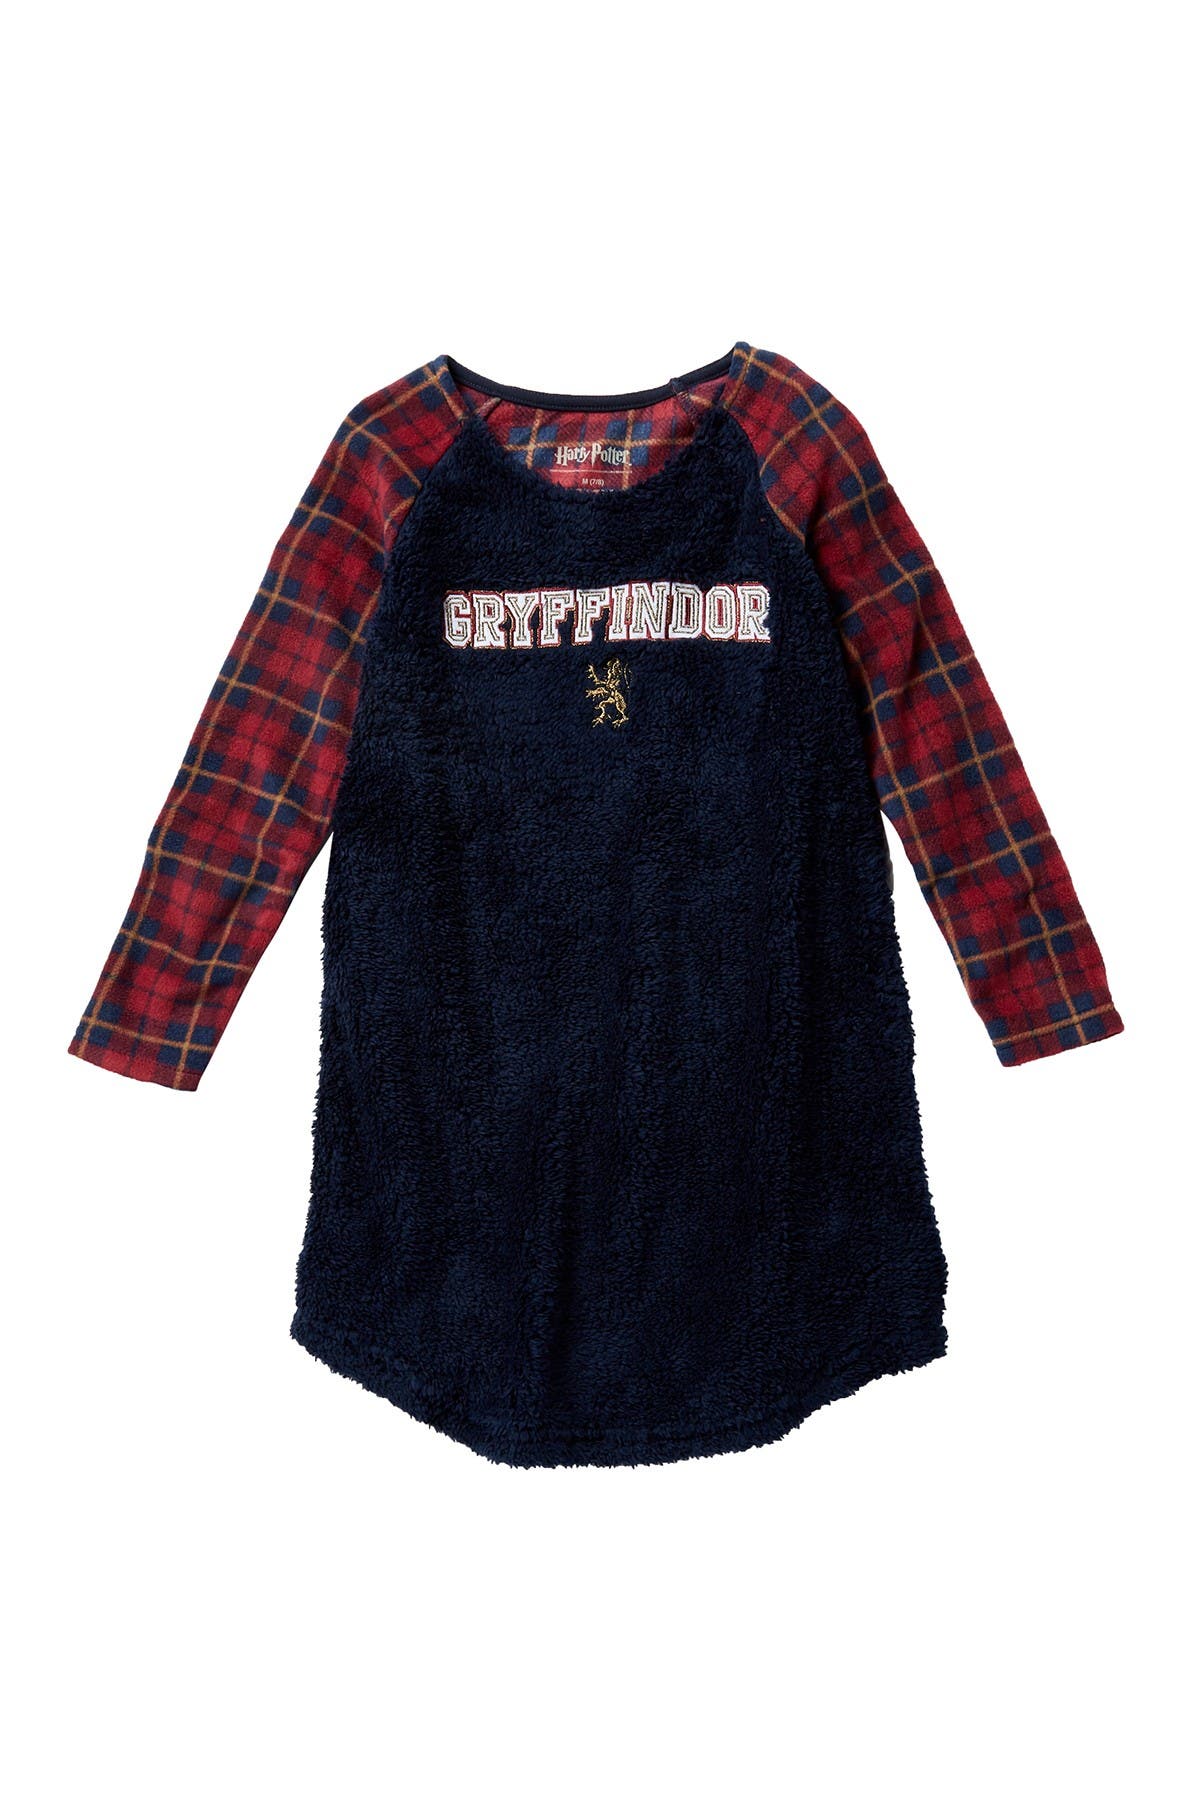 harry potter womens nightgown